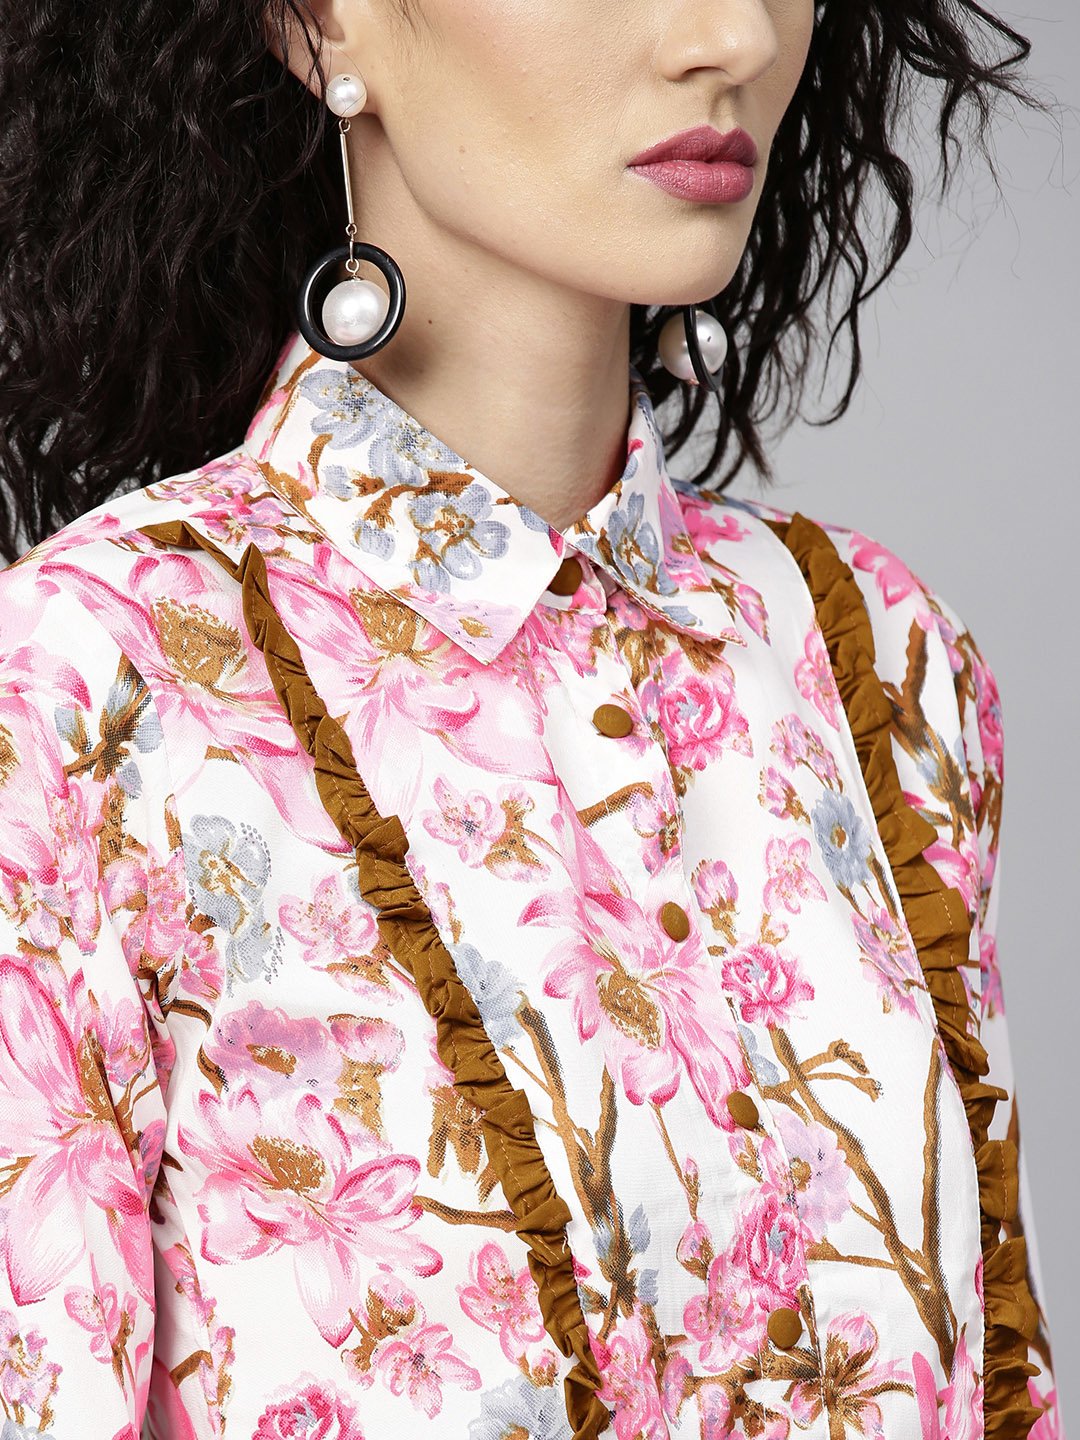 Women's Pink & Mustard Yellow Printed Top With Trousers - Nayo Clothing